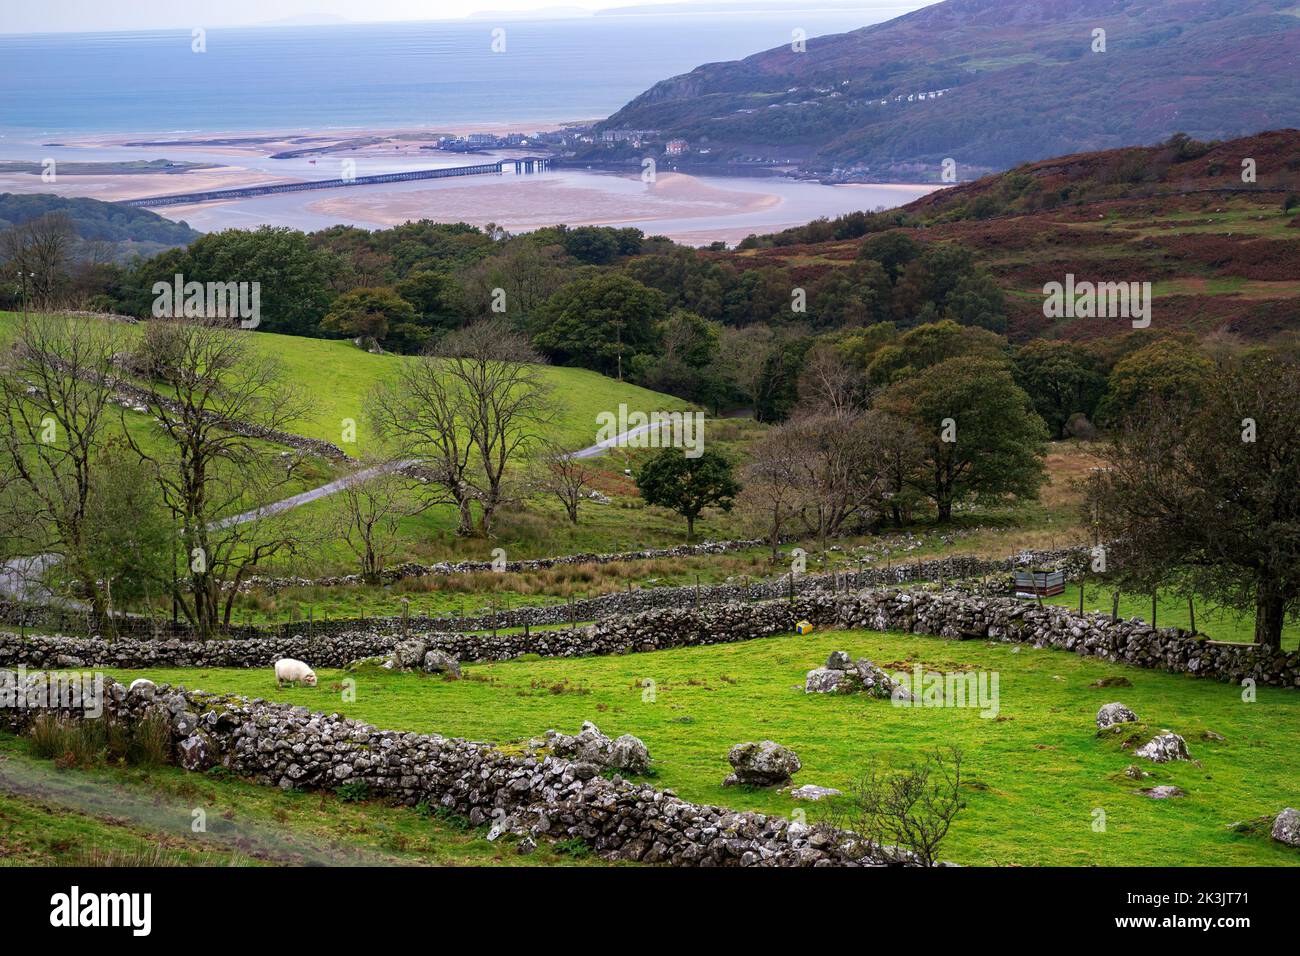 Walking on the hills near Arthog, Gwynned, Wales; view of the Mawddach estuary on an autumn afternoon Stock Photo